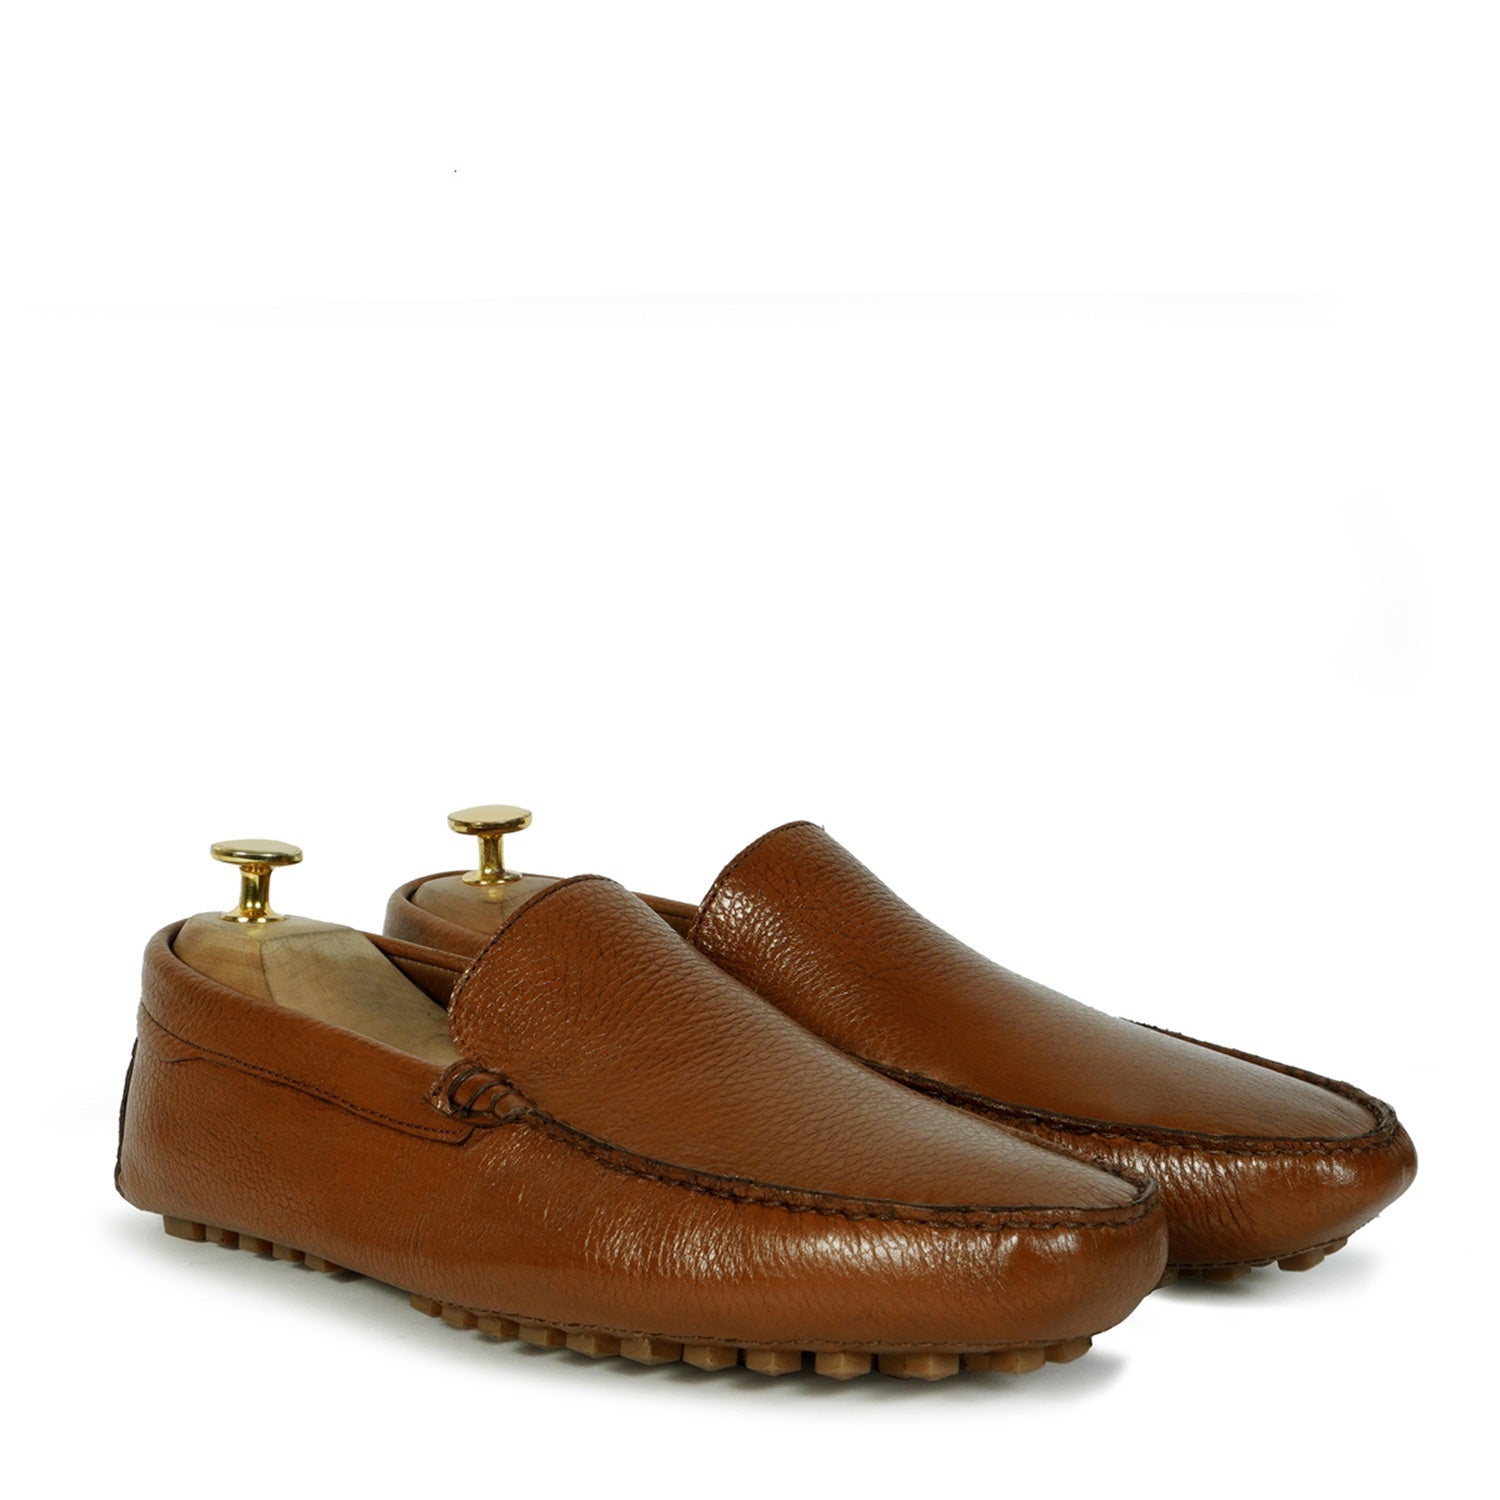 Studded Driver Sole Loafers in Tan Textured Leather